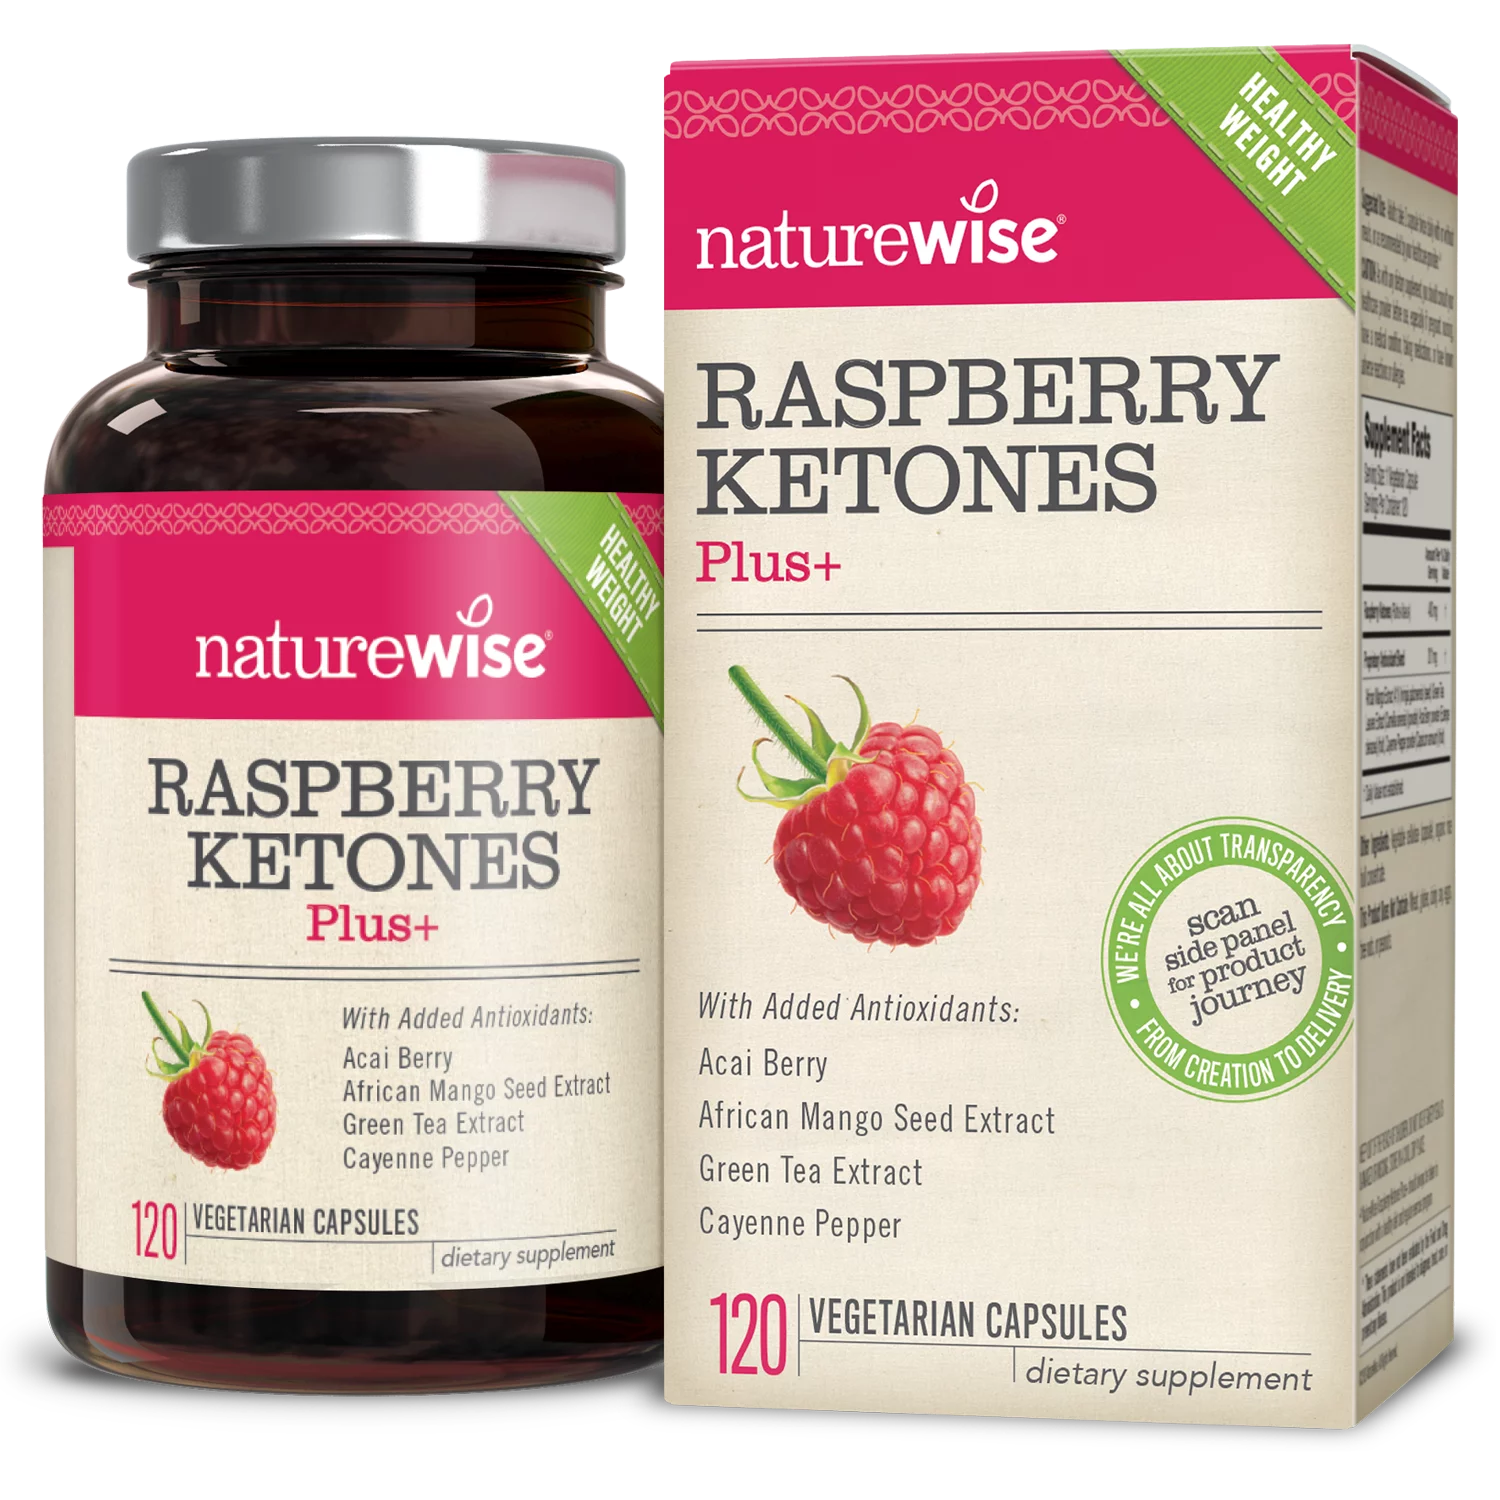 NatureWise Raspberry Ketones 400 mg Plus+ Advanced Antioxidant Blend with Green Tea for Weight Loss, 120 Ct